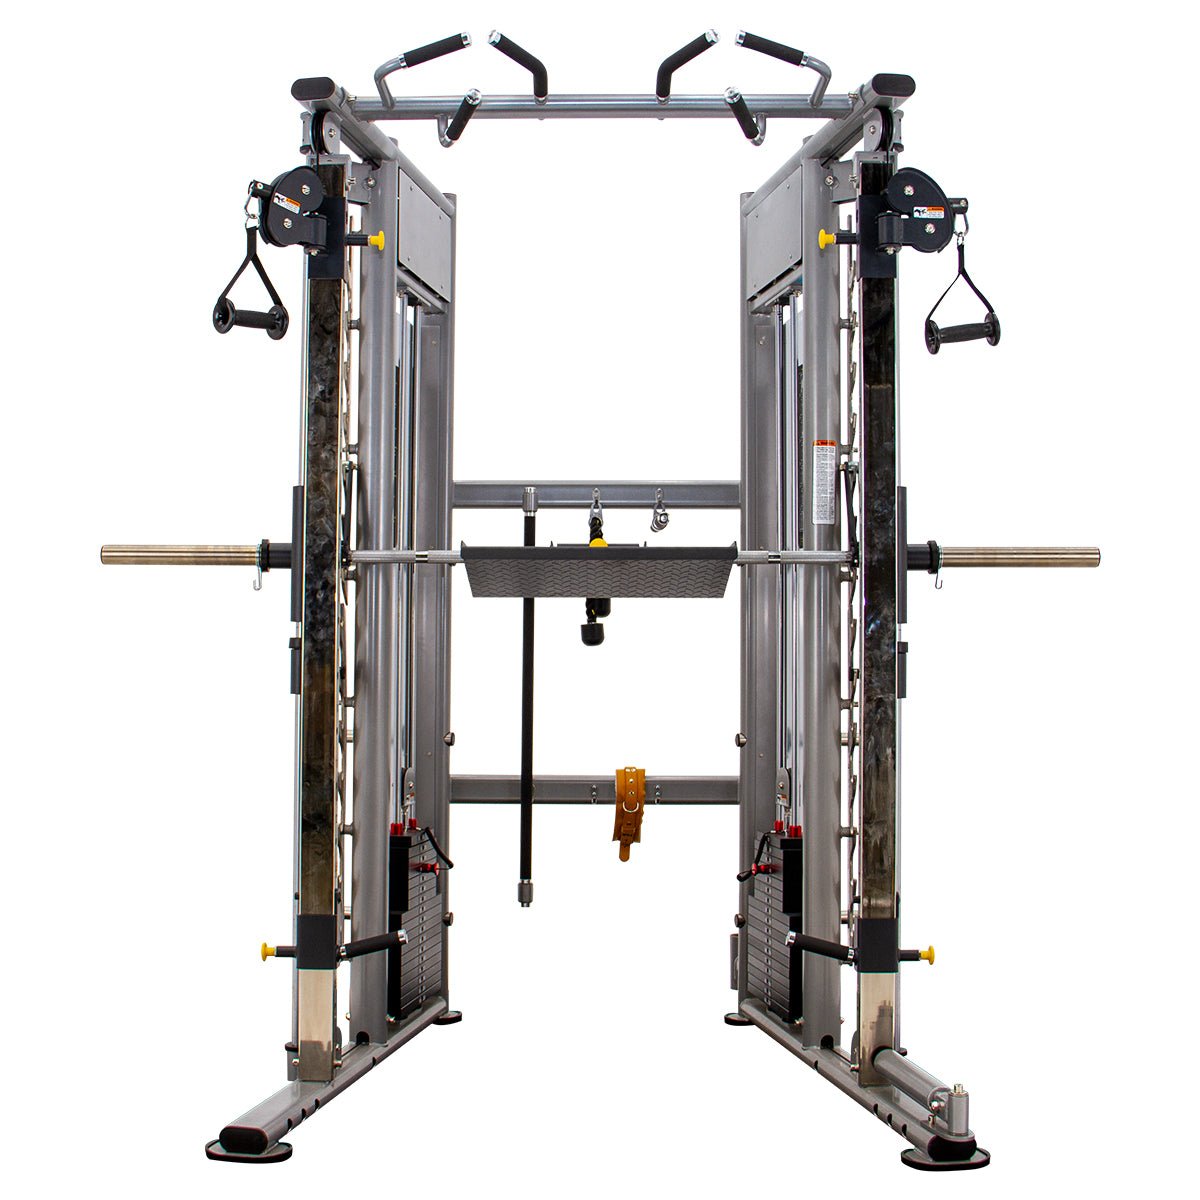 CGS Universal Trainer weights and cable machine all in one training system